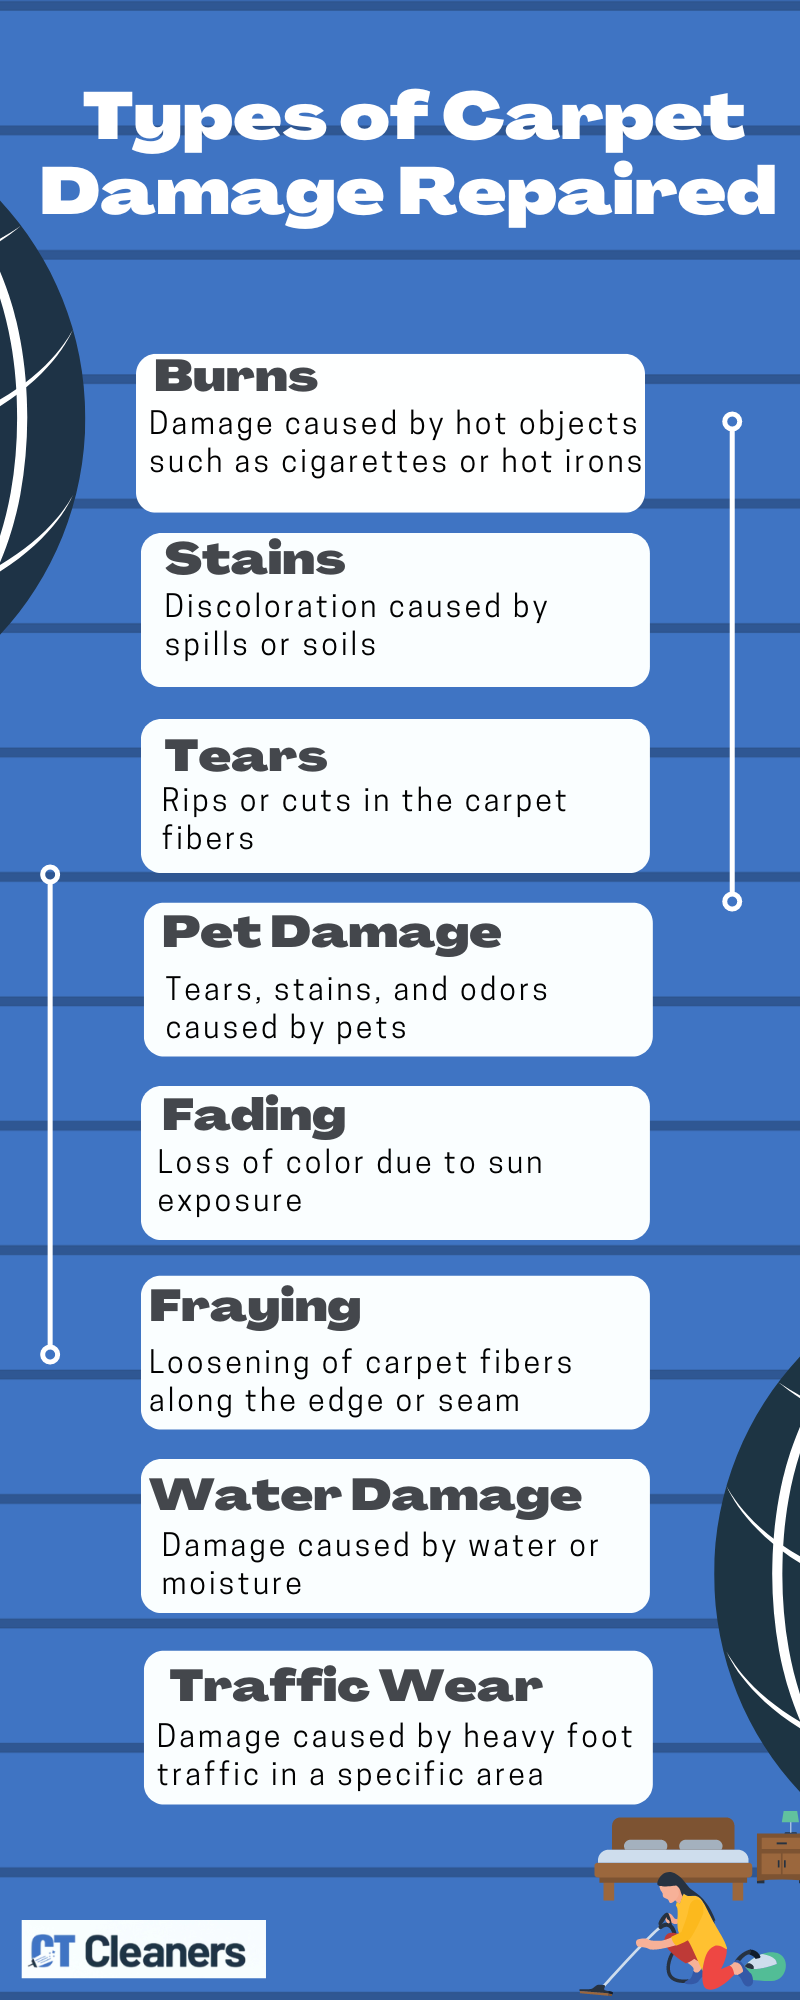 Types of Carpet Damage Repaired